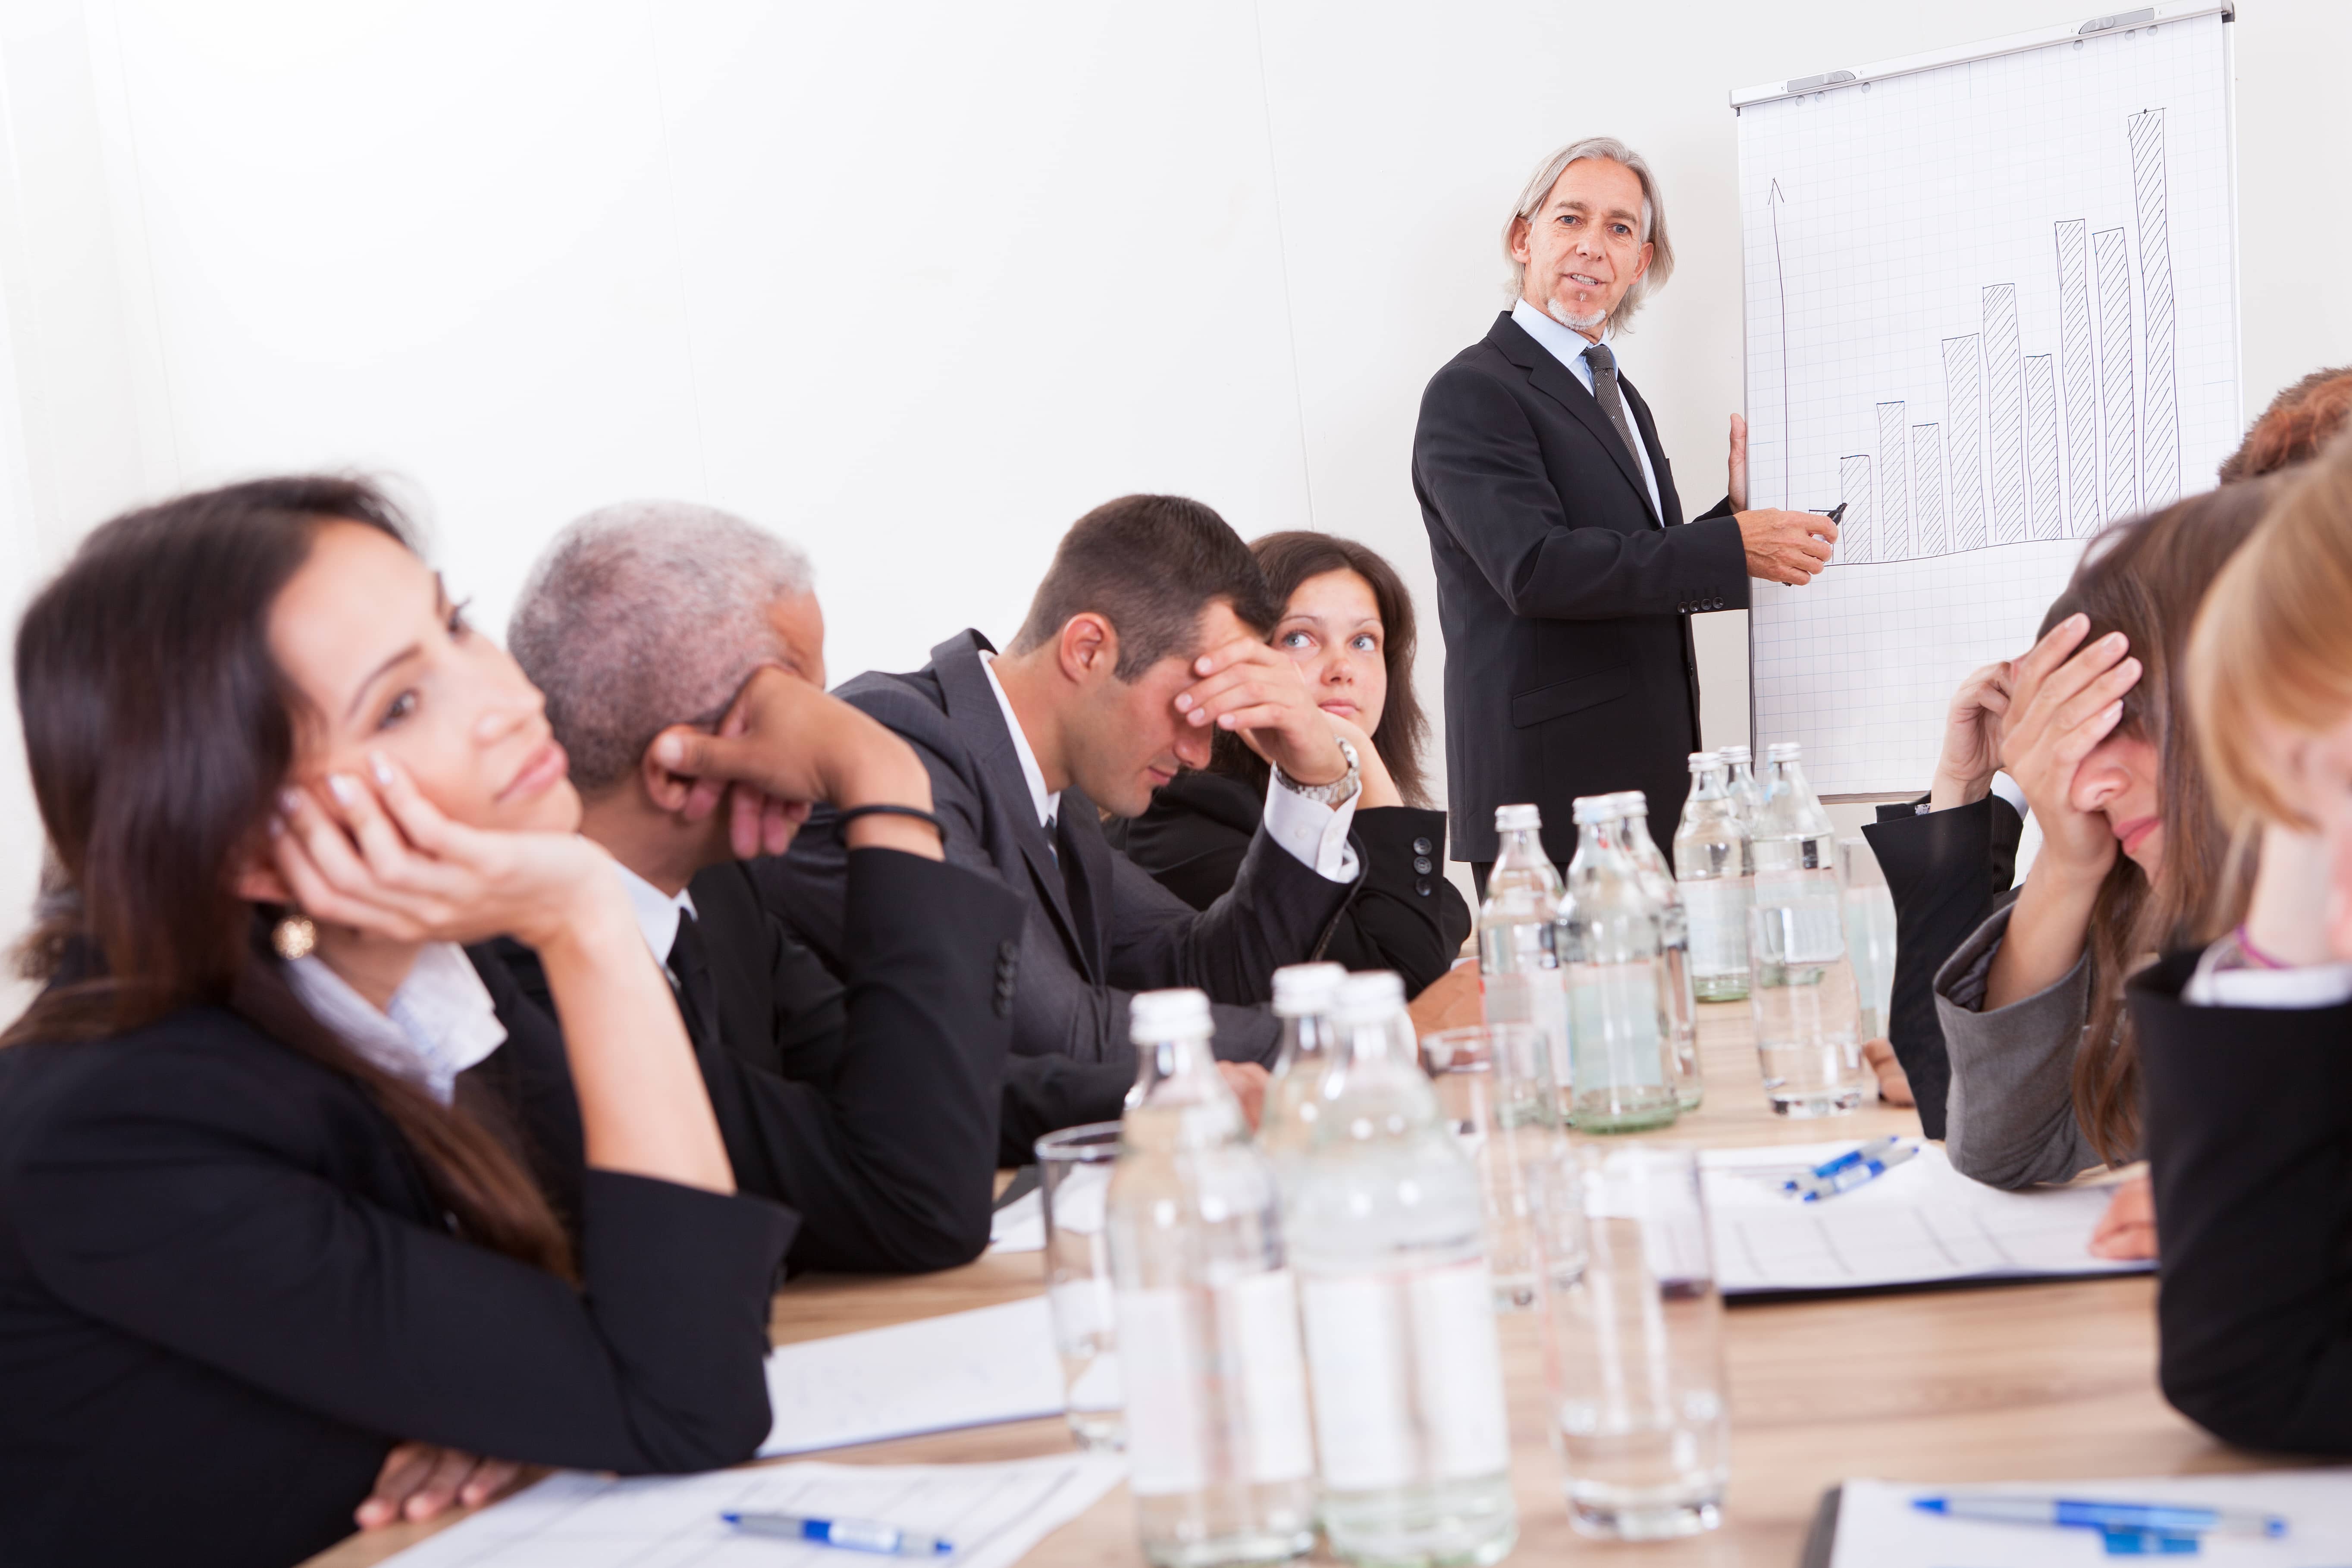 7 steps to better meetings with your team